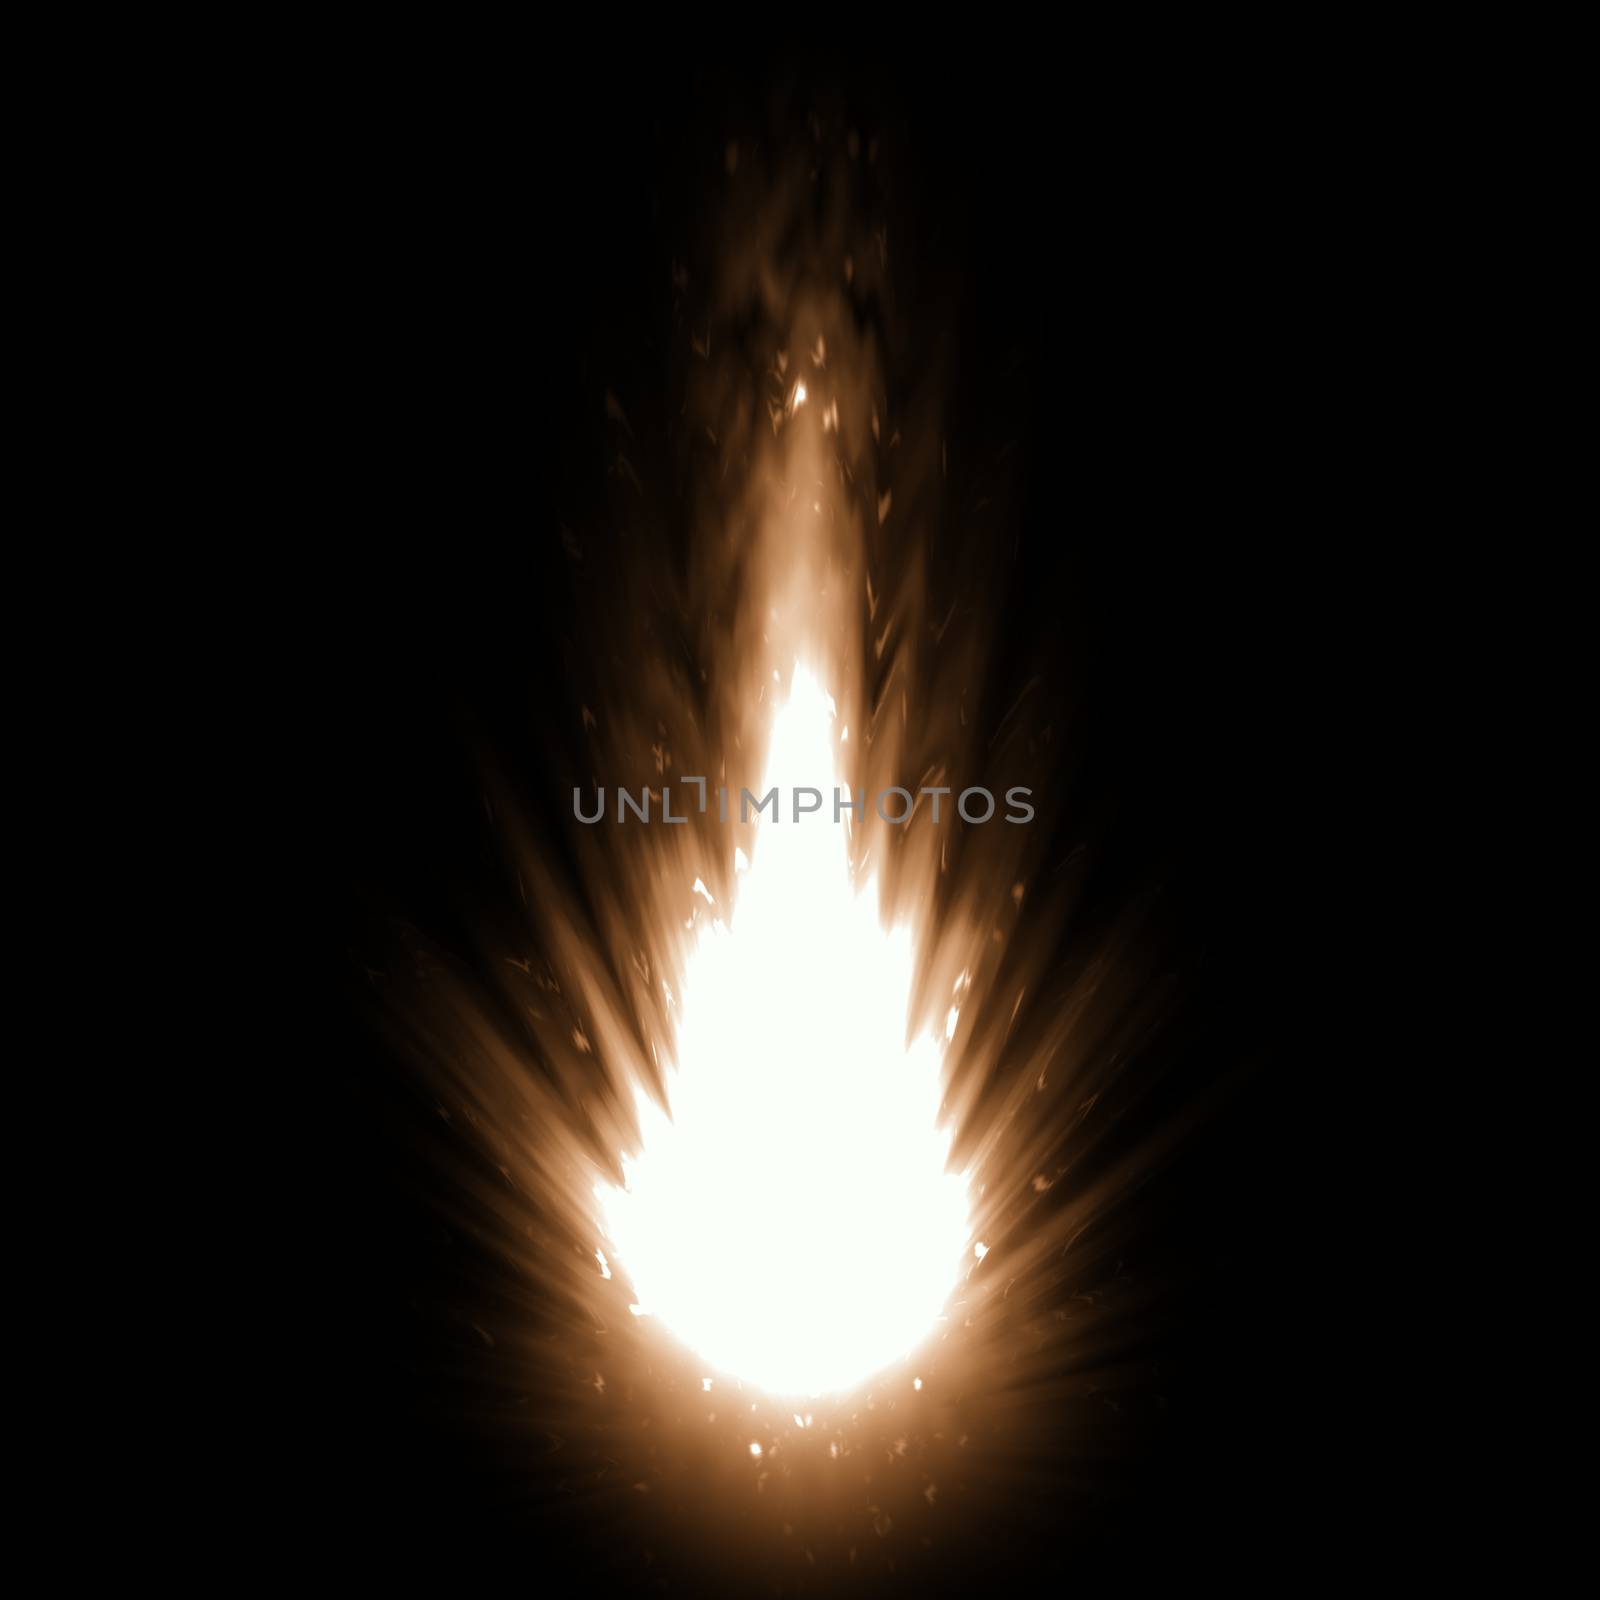 2d illustration of a hot fire explosion